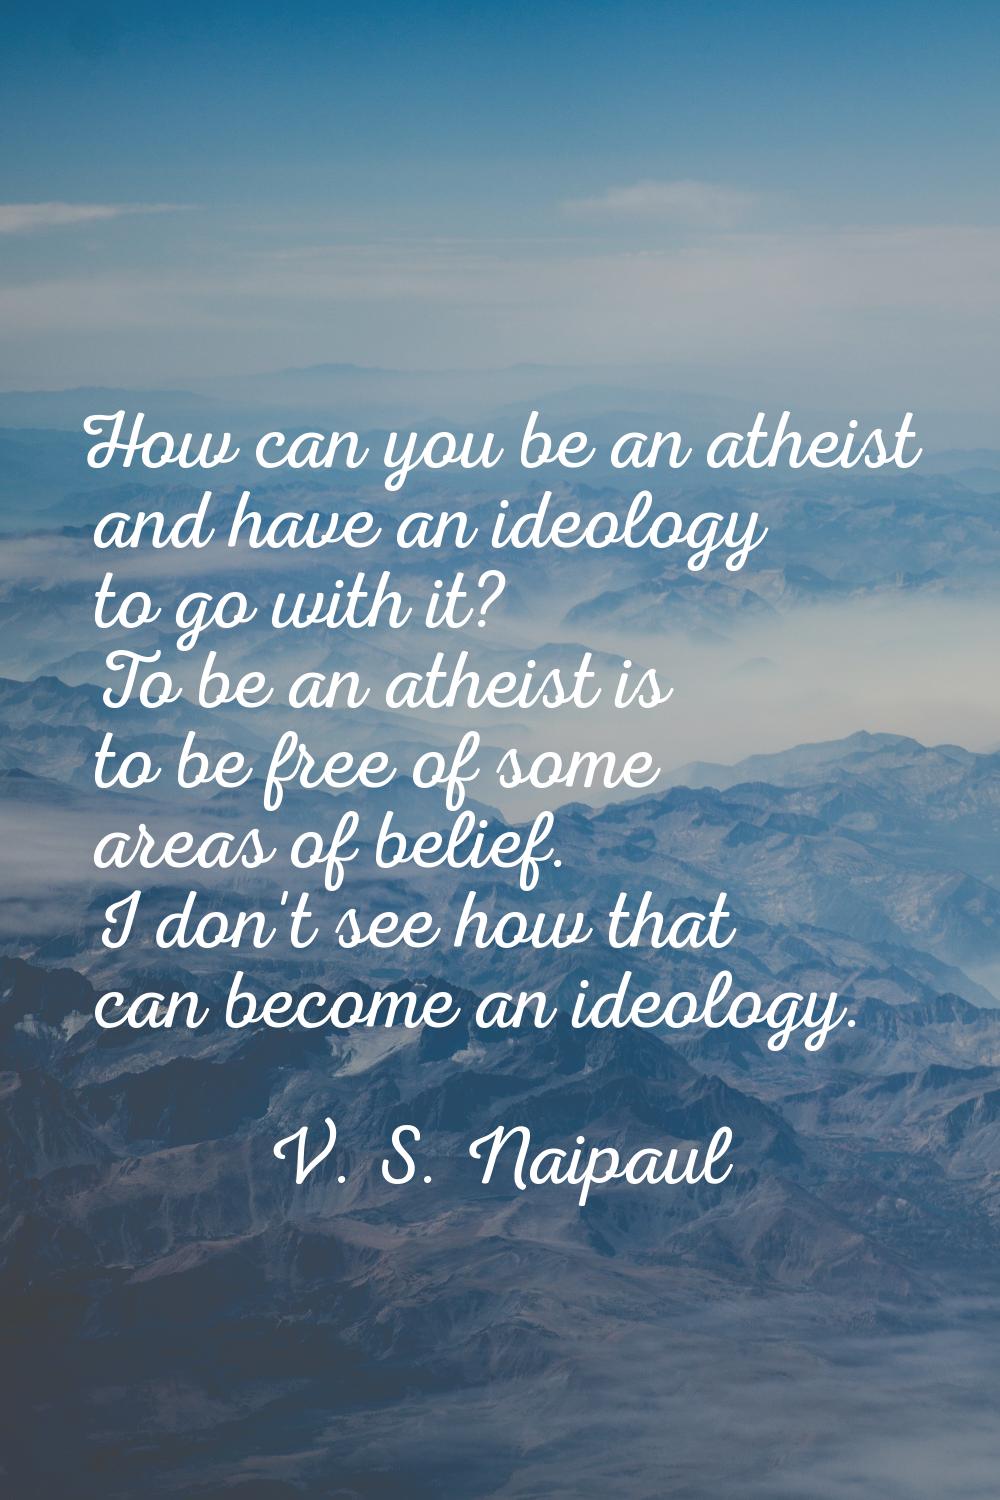 How can you be an atheist and have an ideology to go with it? To be an atheist is to be free of som